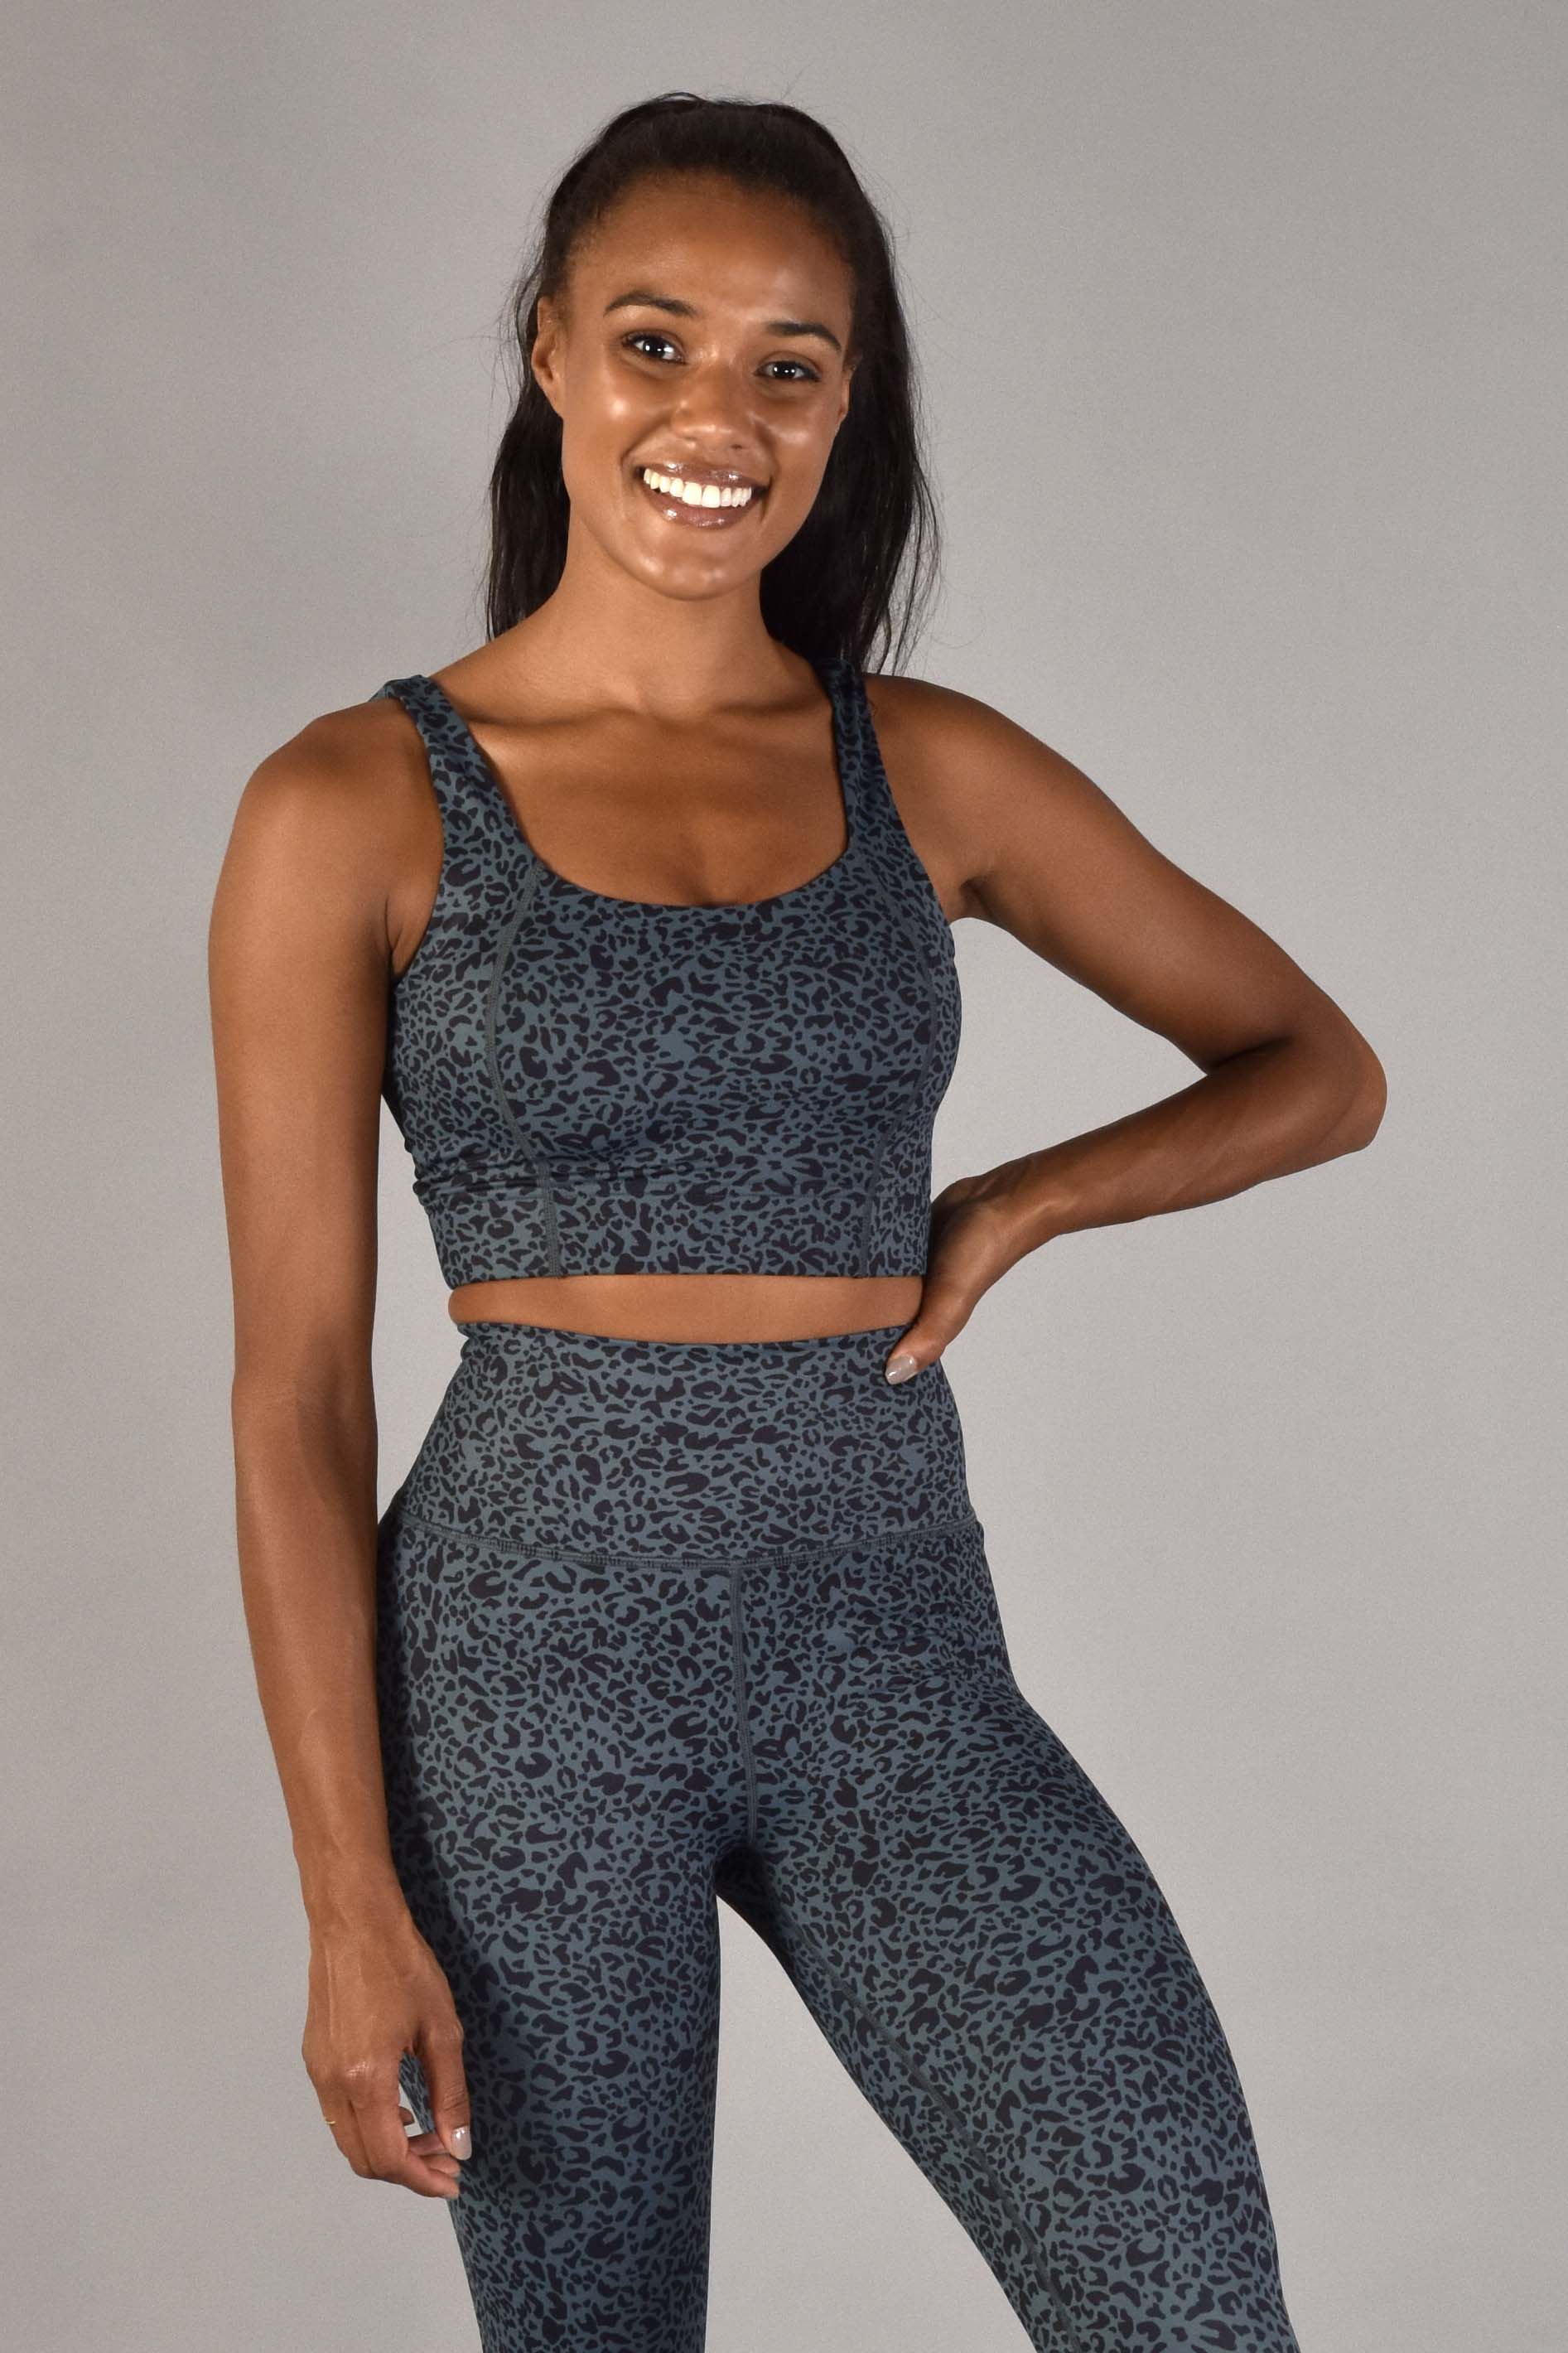 WEAR LOVE MORE Designer Sustainable Activewear.  Sophia Longline Bra in Emerald Leopard.  Dark Blue Green Leopard Print Bra Support Top.  Paired with 7/8 Emerald Leopard Legging.  Luxury Recycled Performance Fabric.